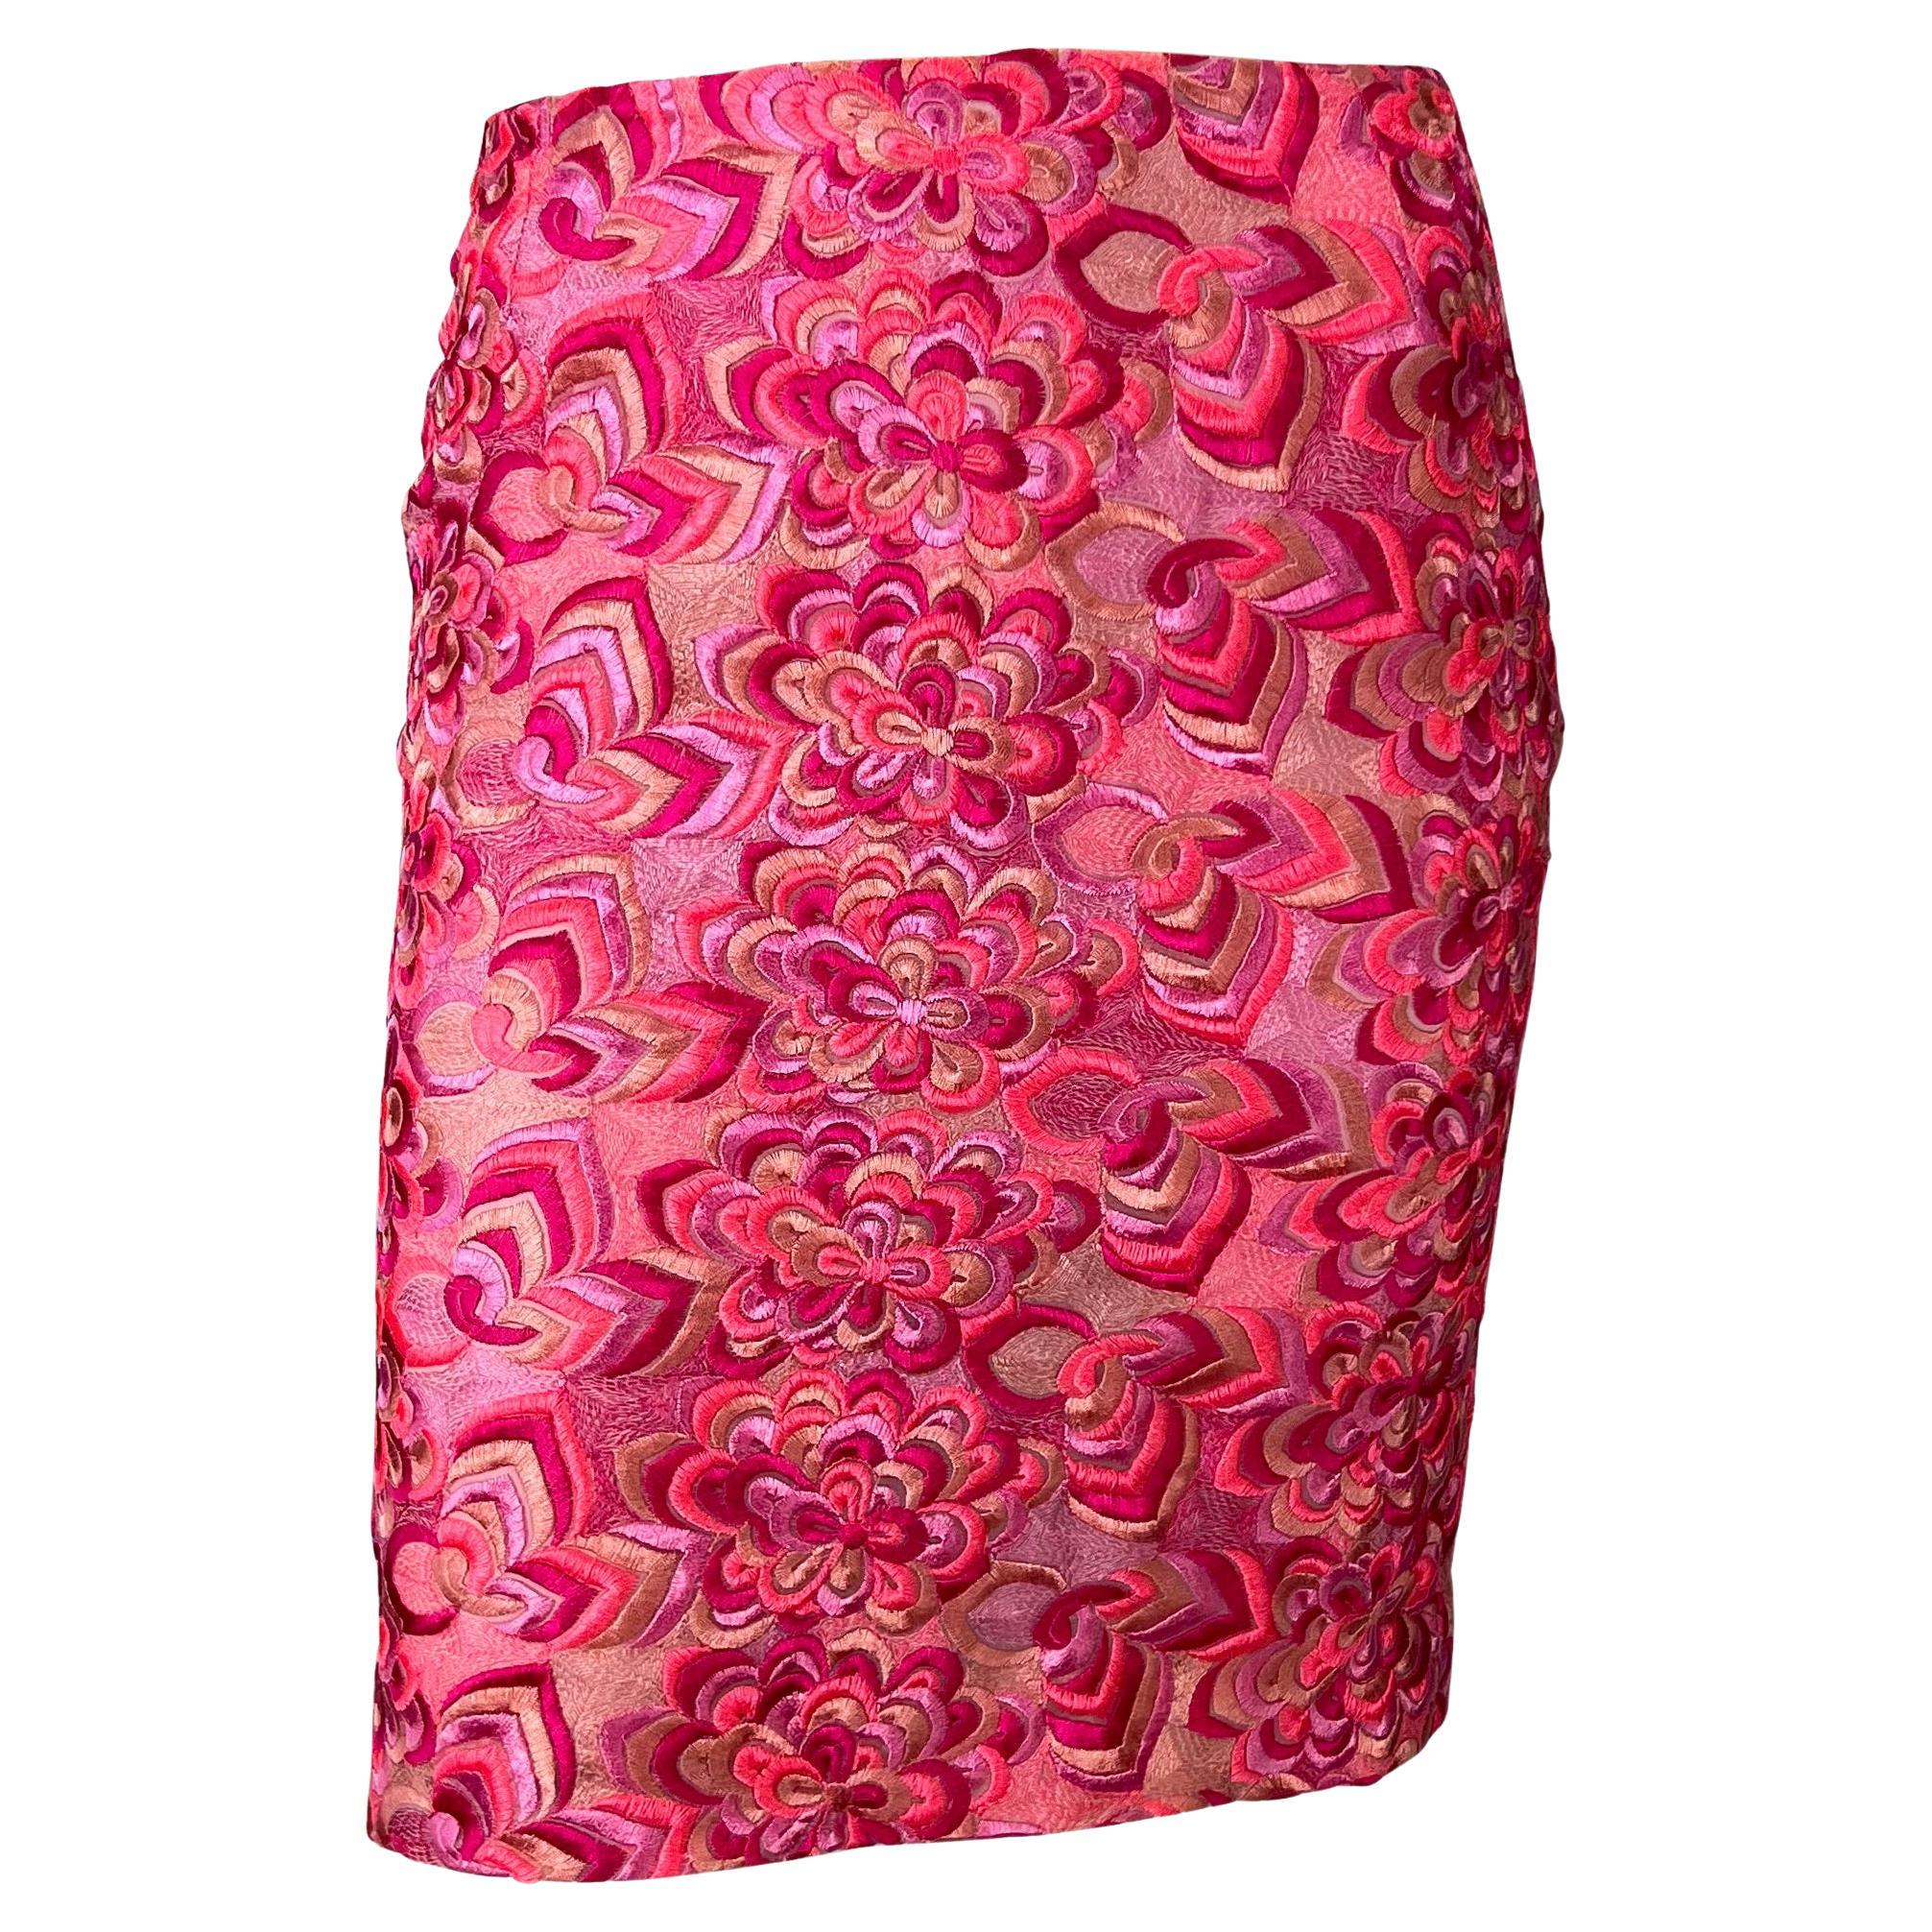 S/S 2000 Gianni Versace by Donatella Neon Pink Floral Embroidered Skirt For Sale